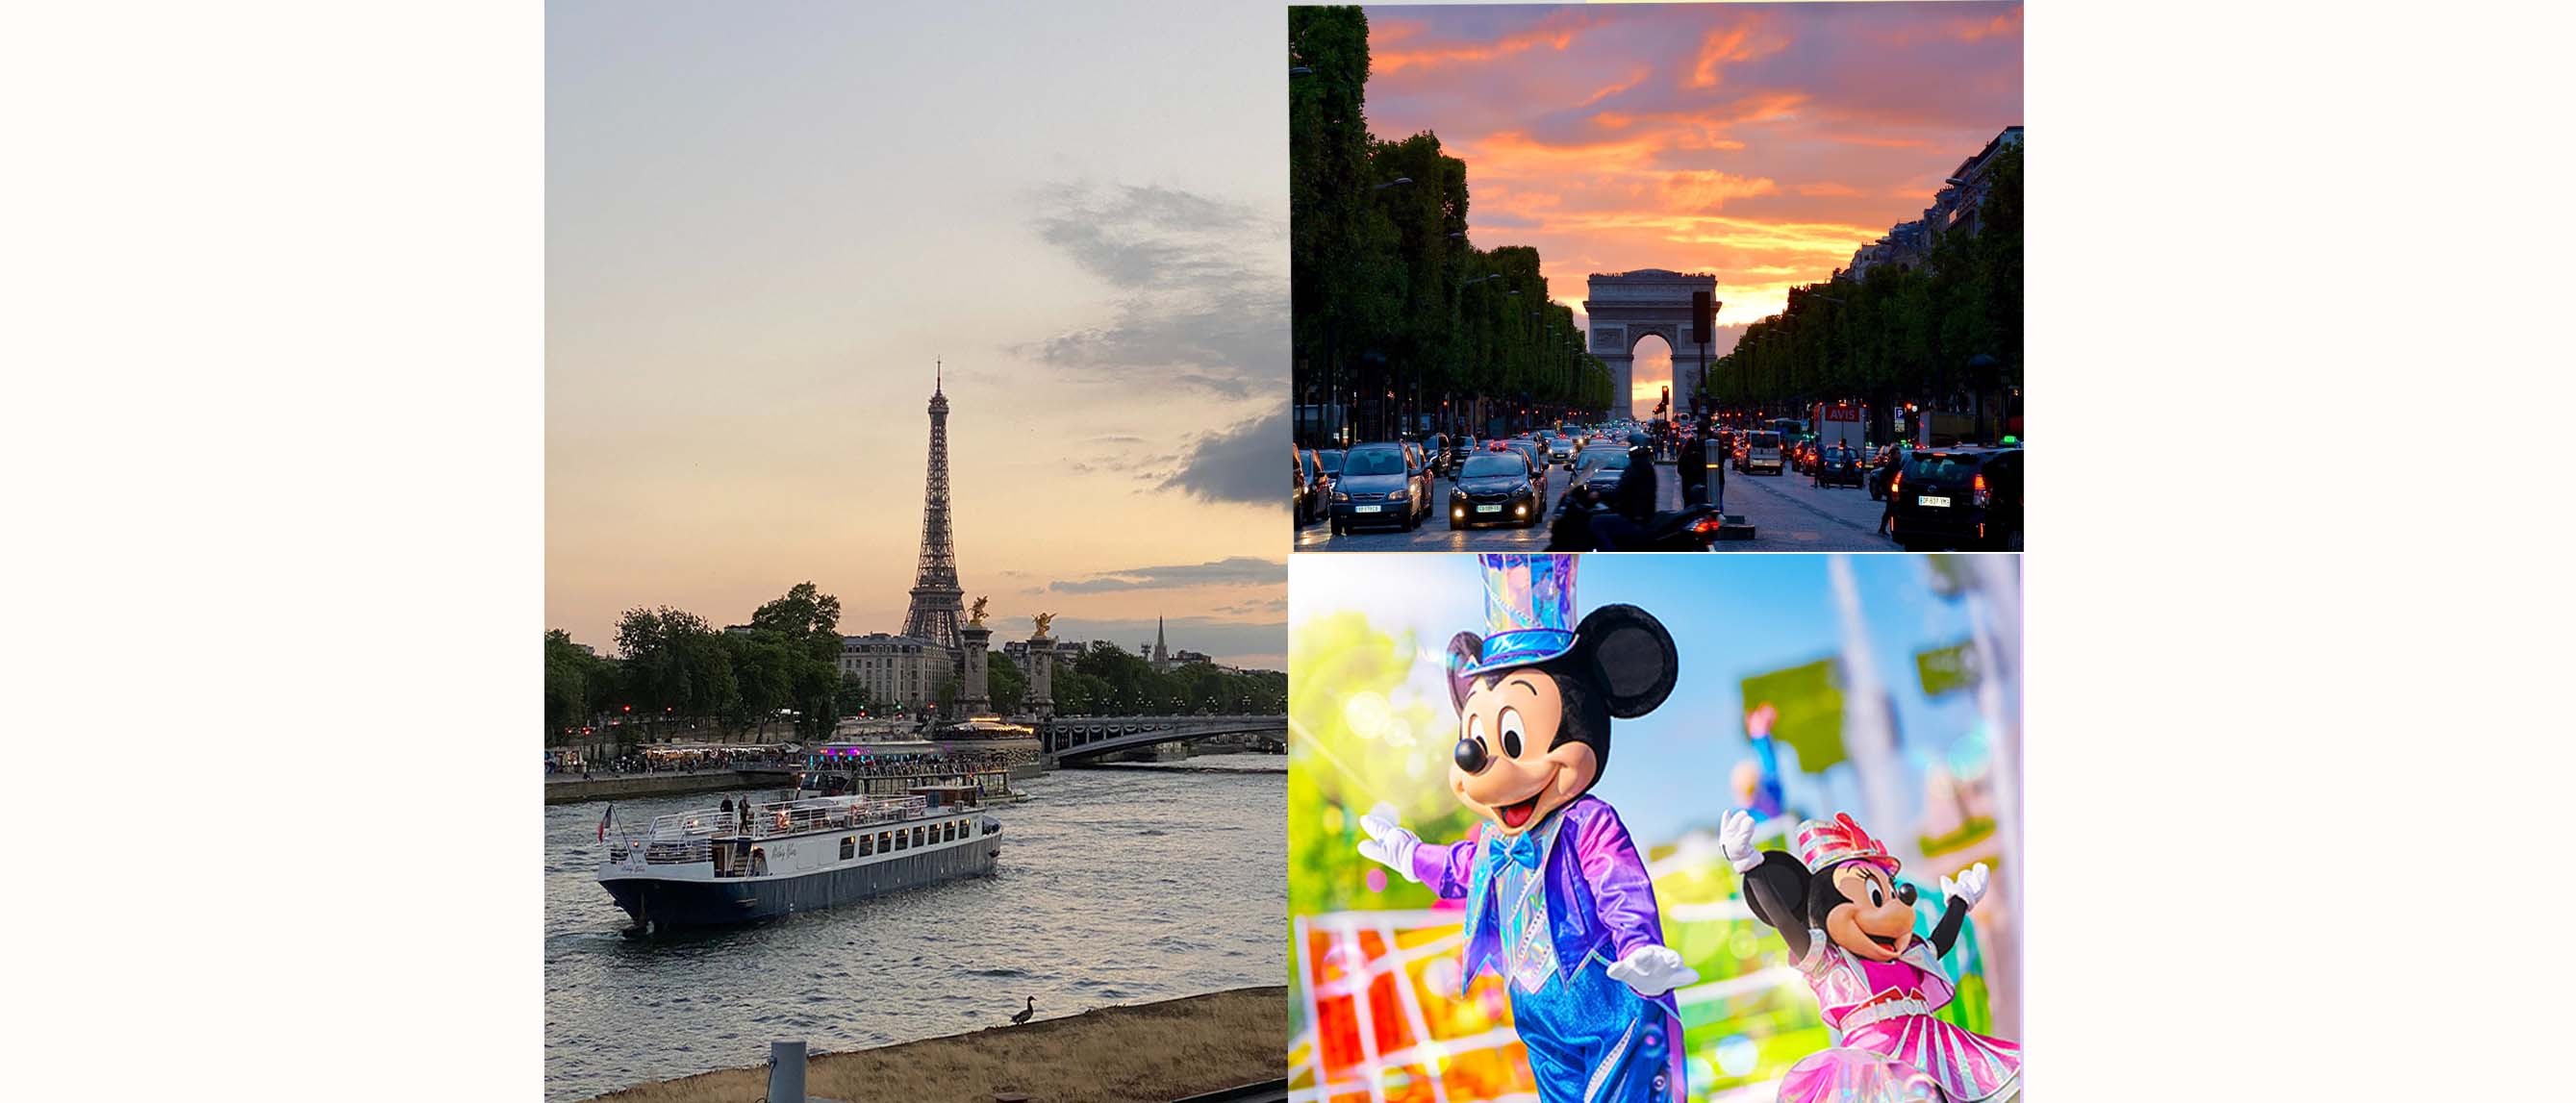 What are the best things to do in Paris?